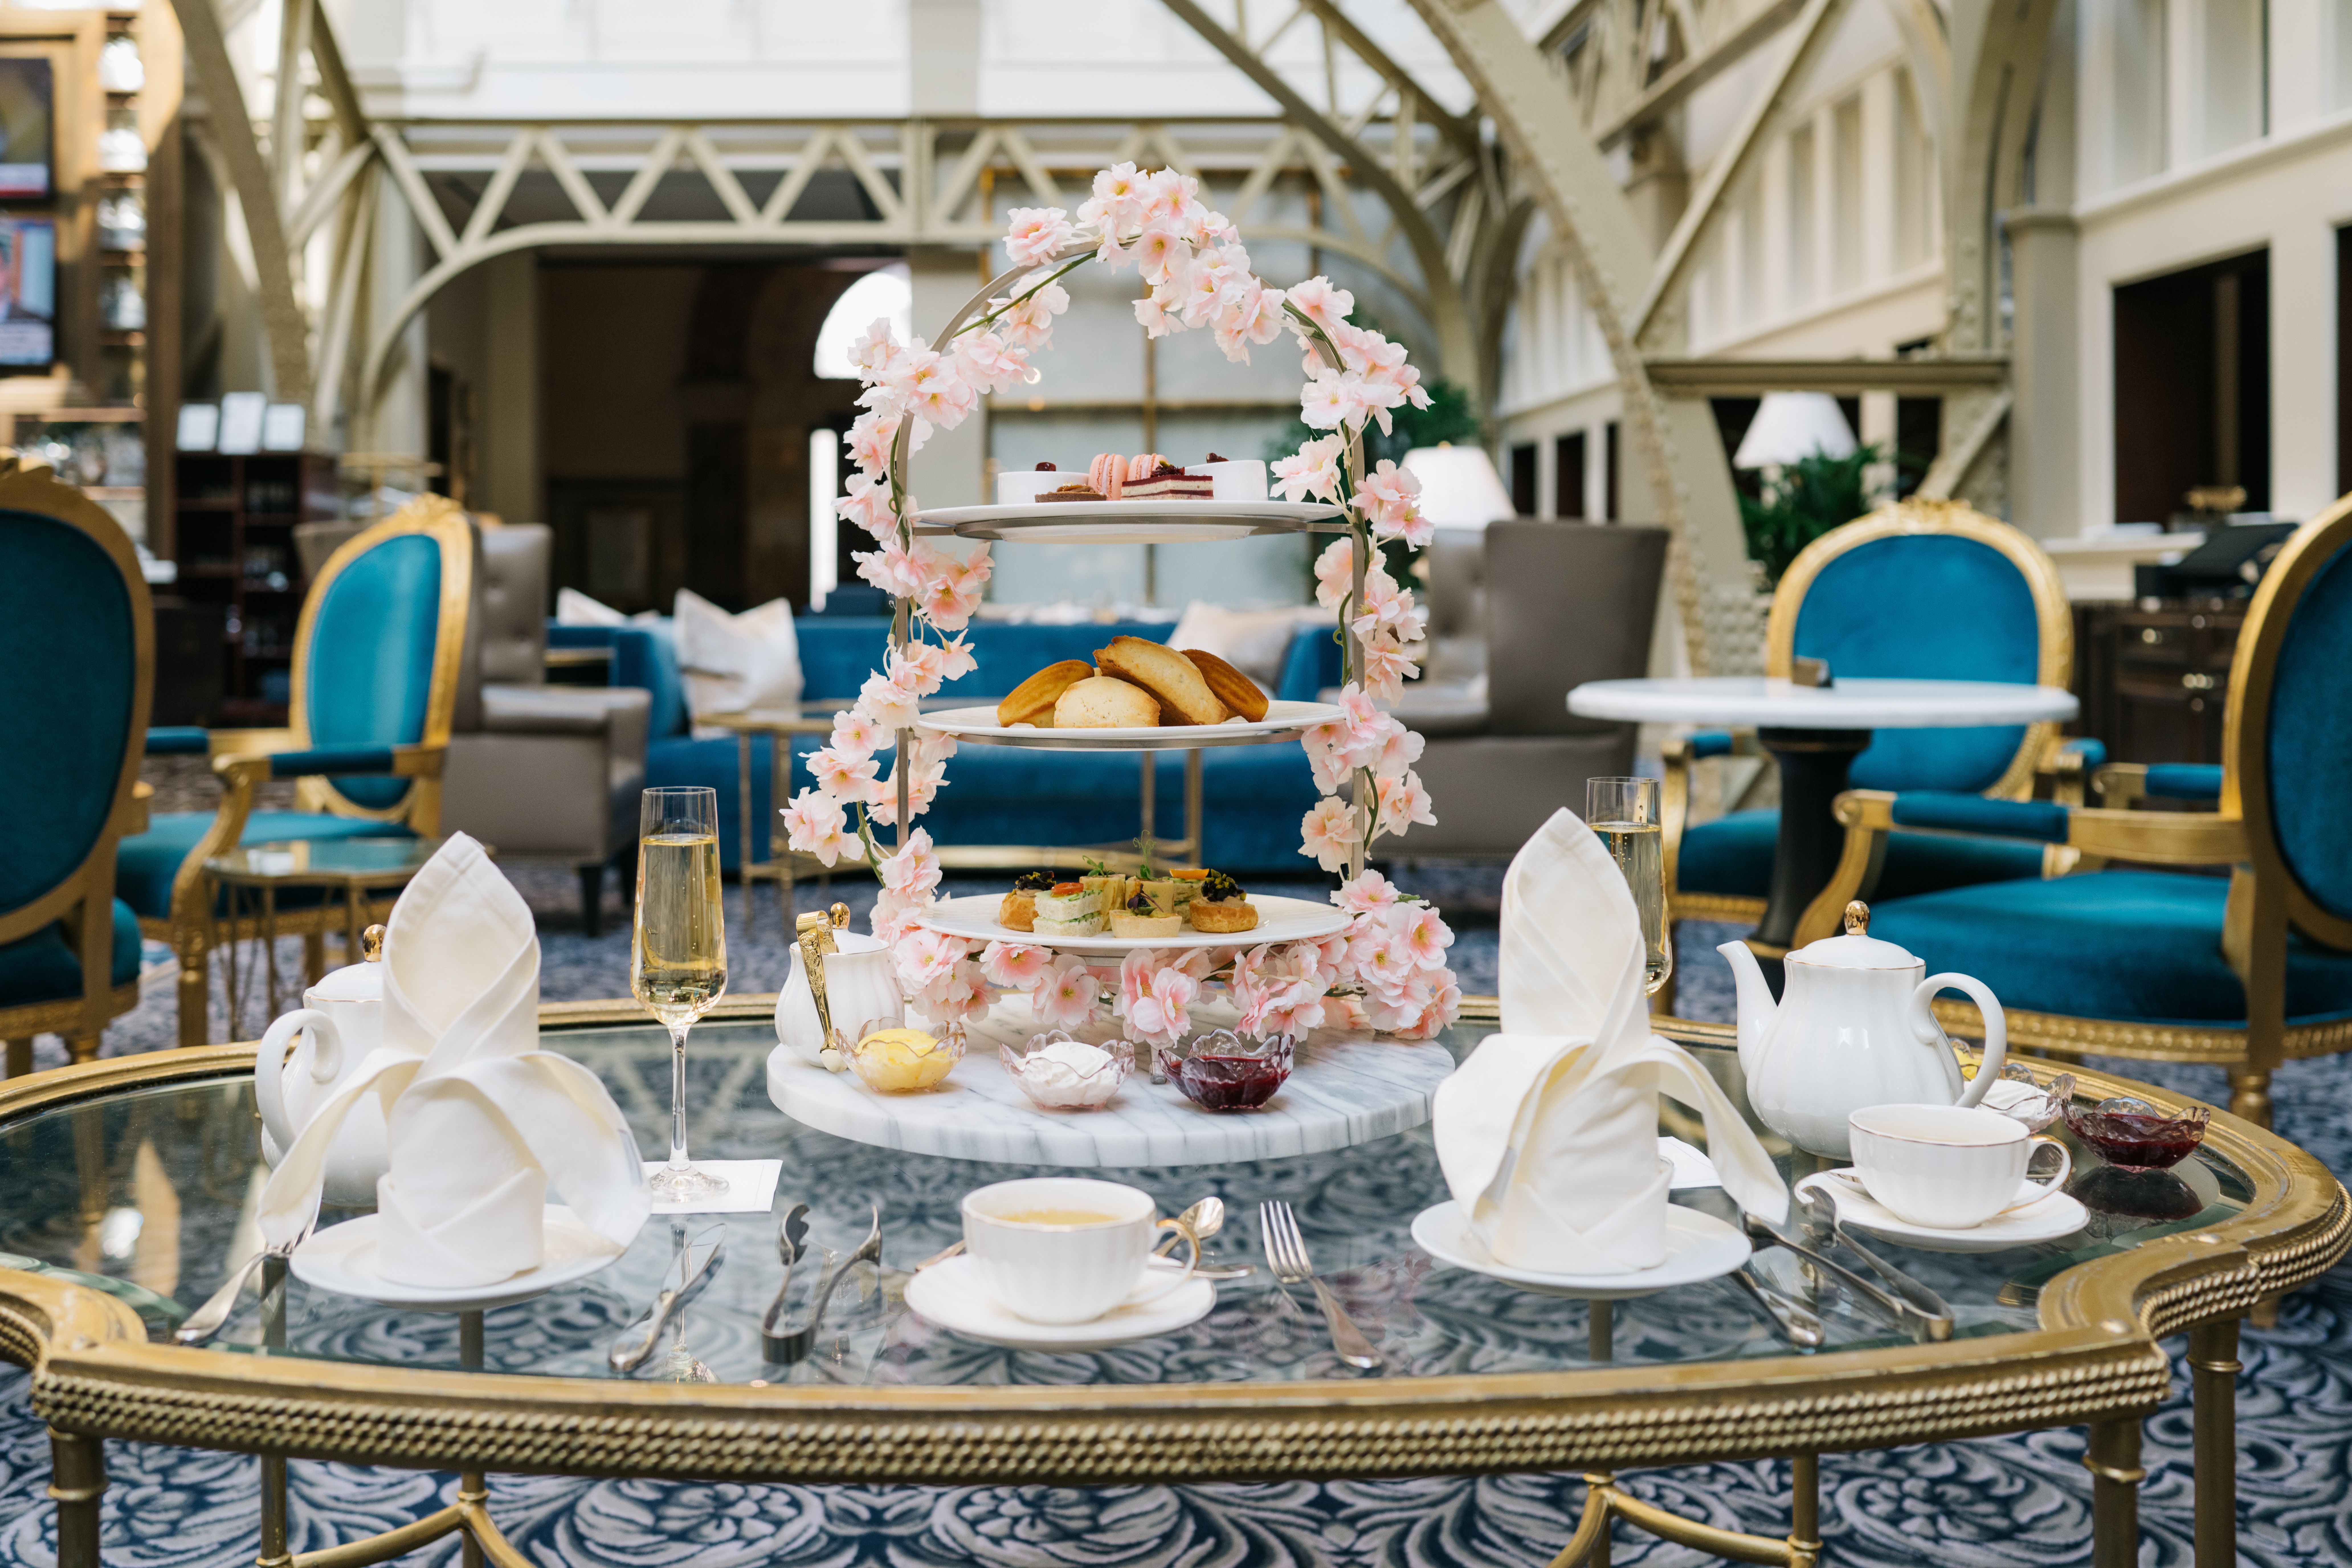 Tea service with cherry blossoms at The Waldorf Astoria DC